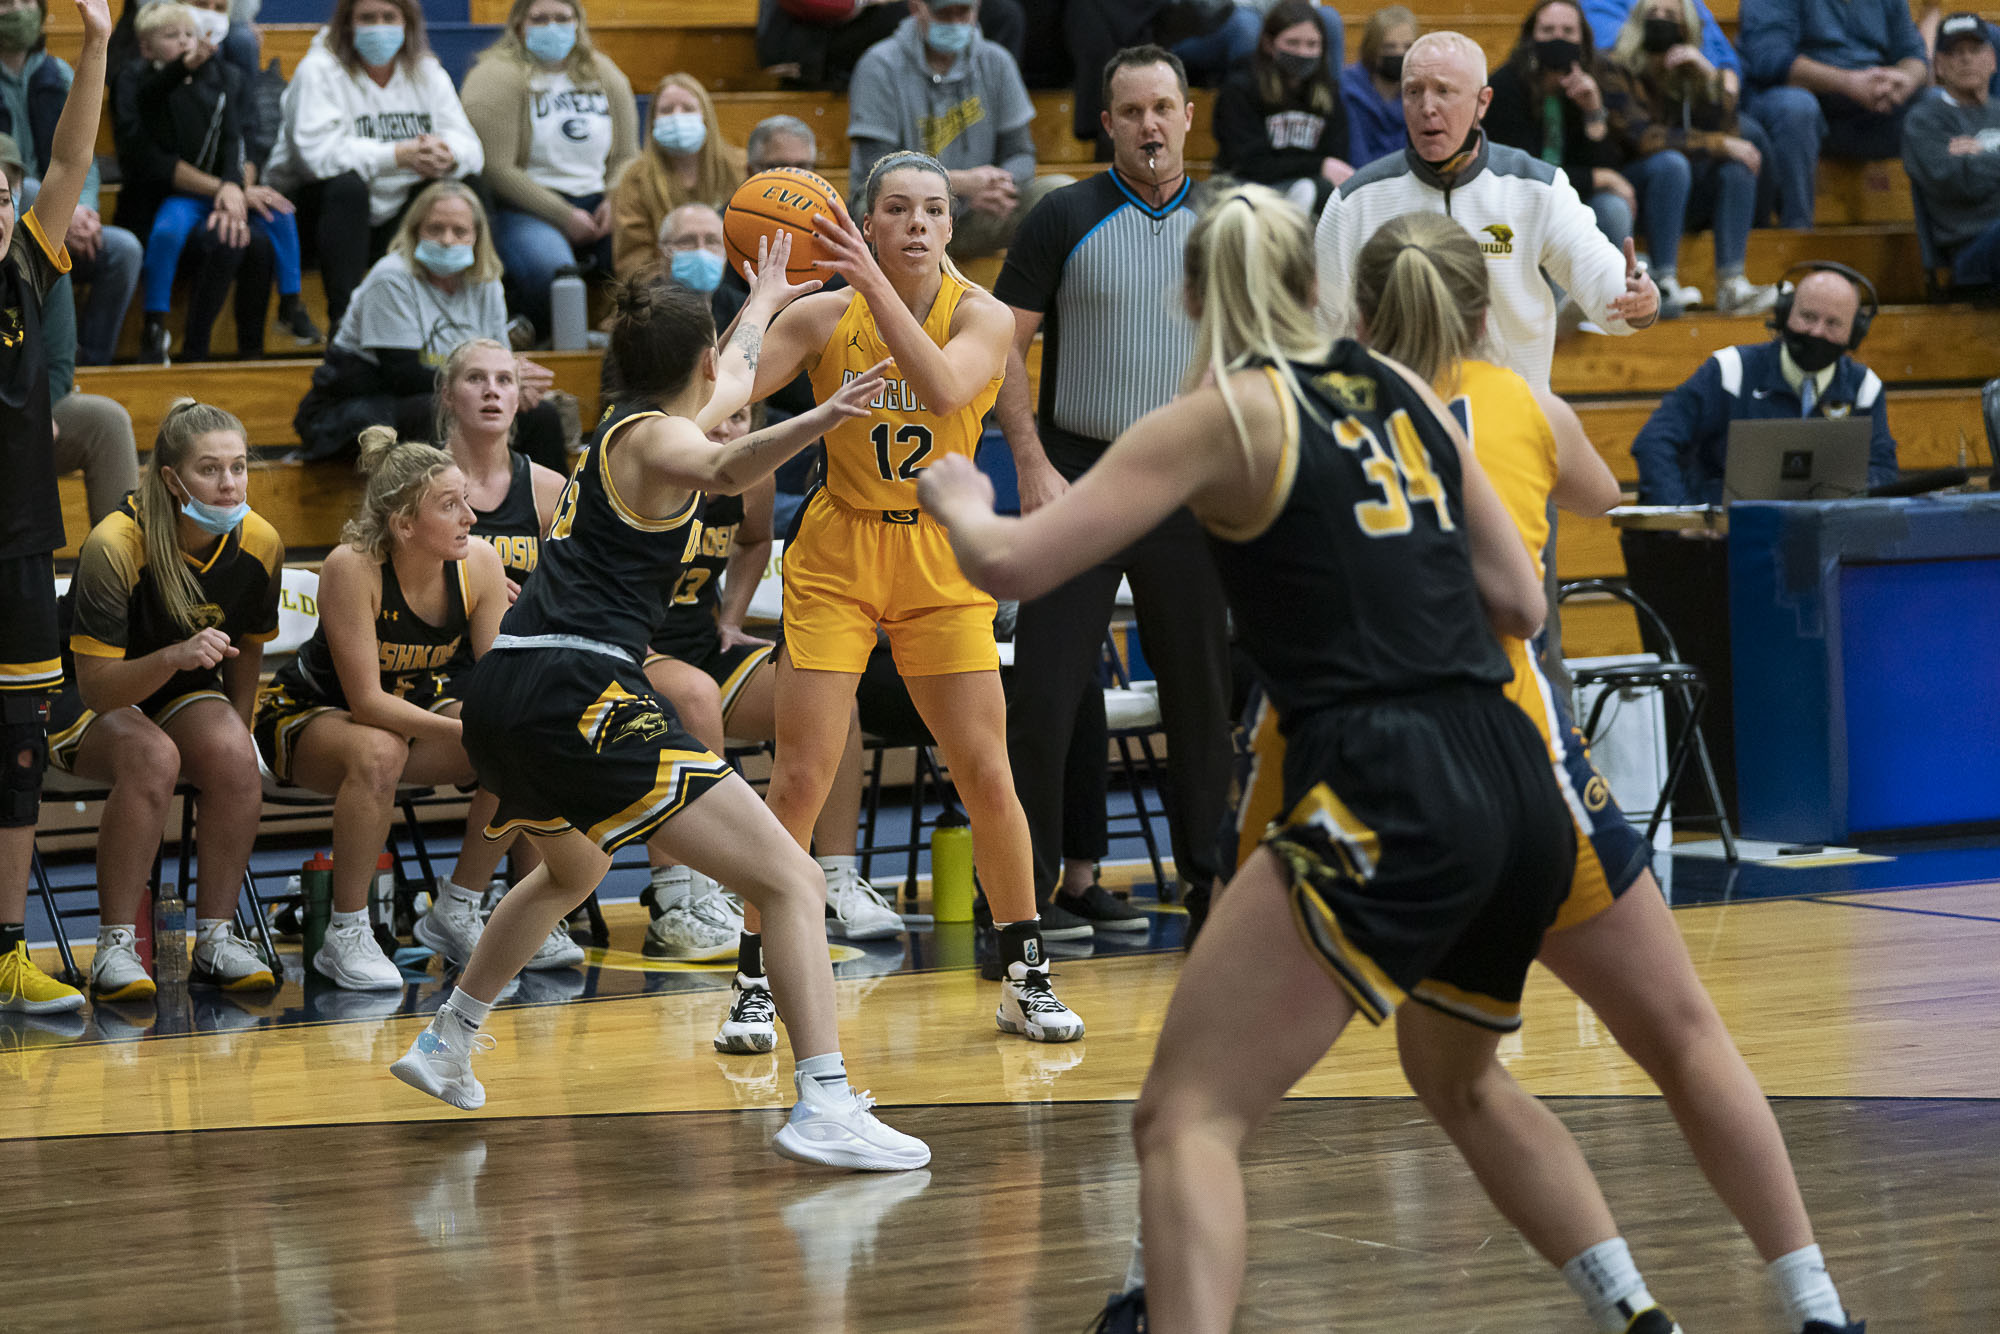 Ruden's Double-Double and A Season High By Crouch Push No. 8 UWEC Over Austin